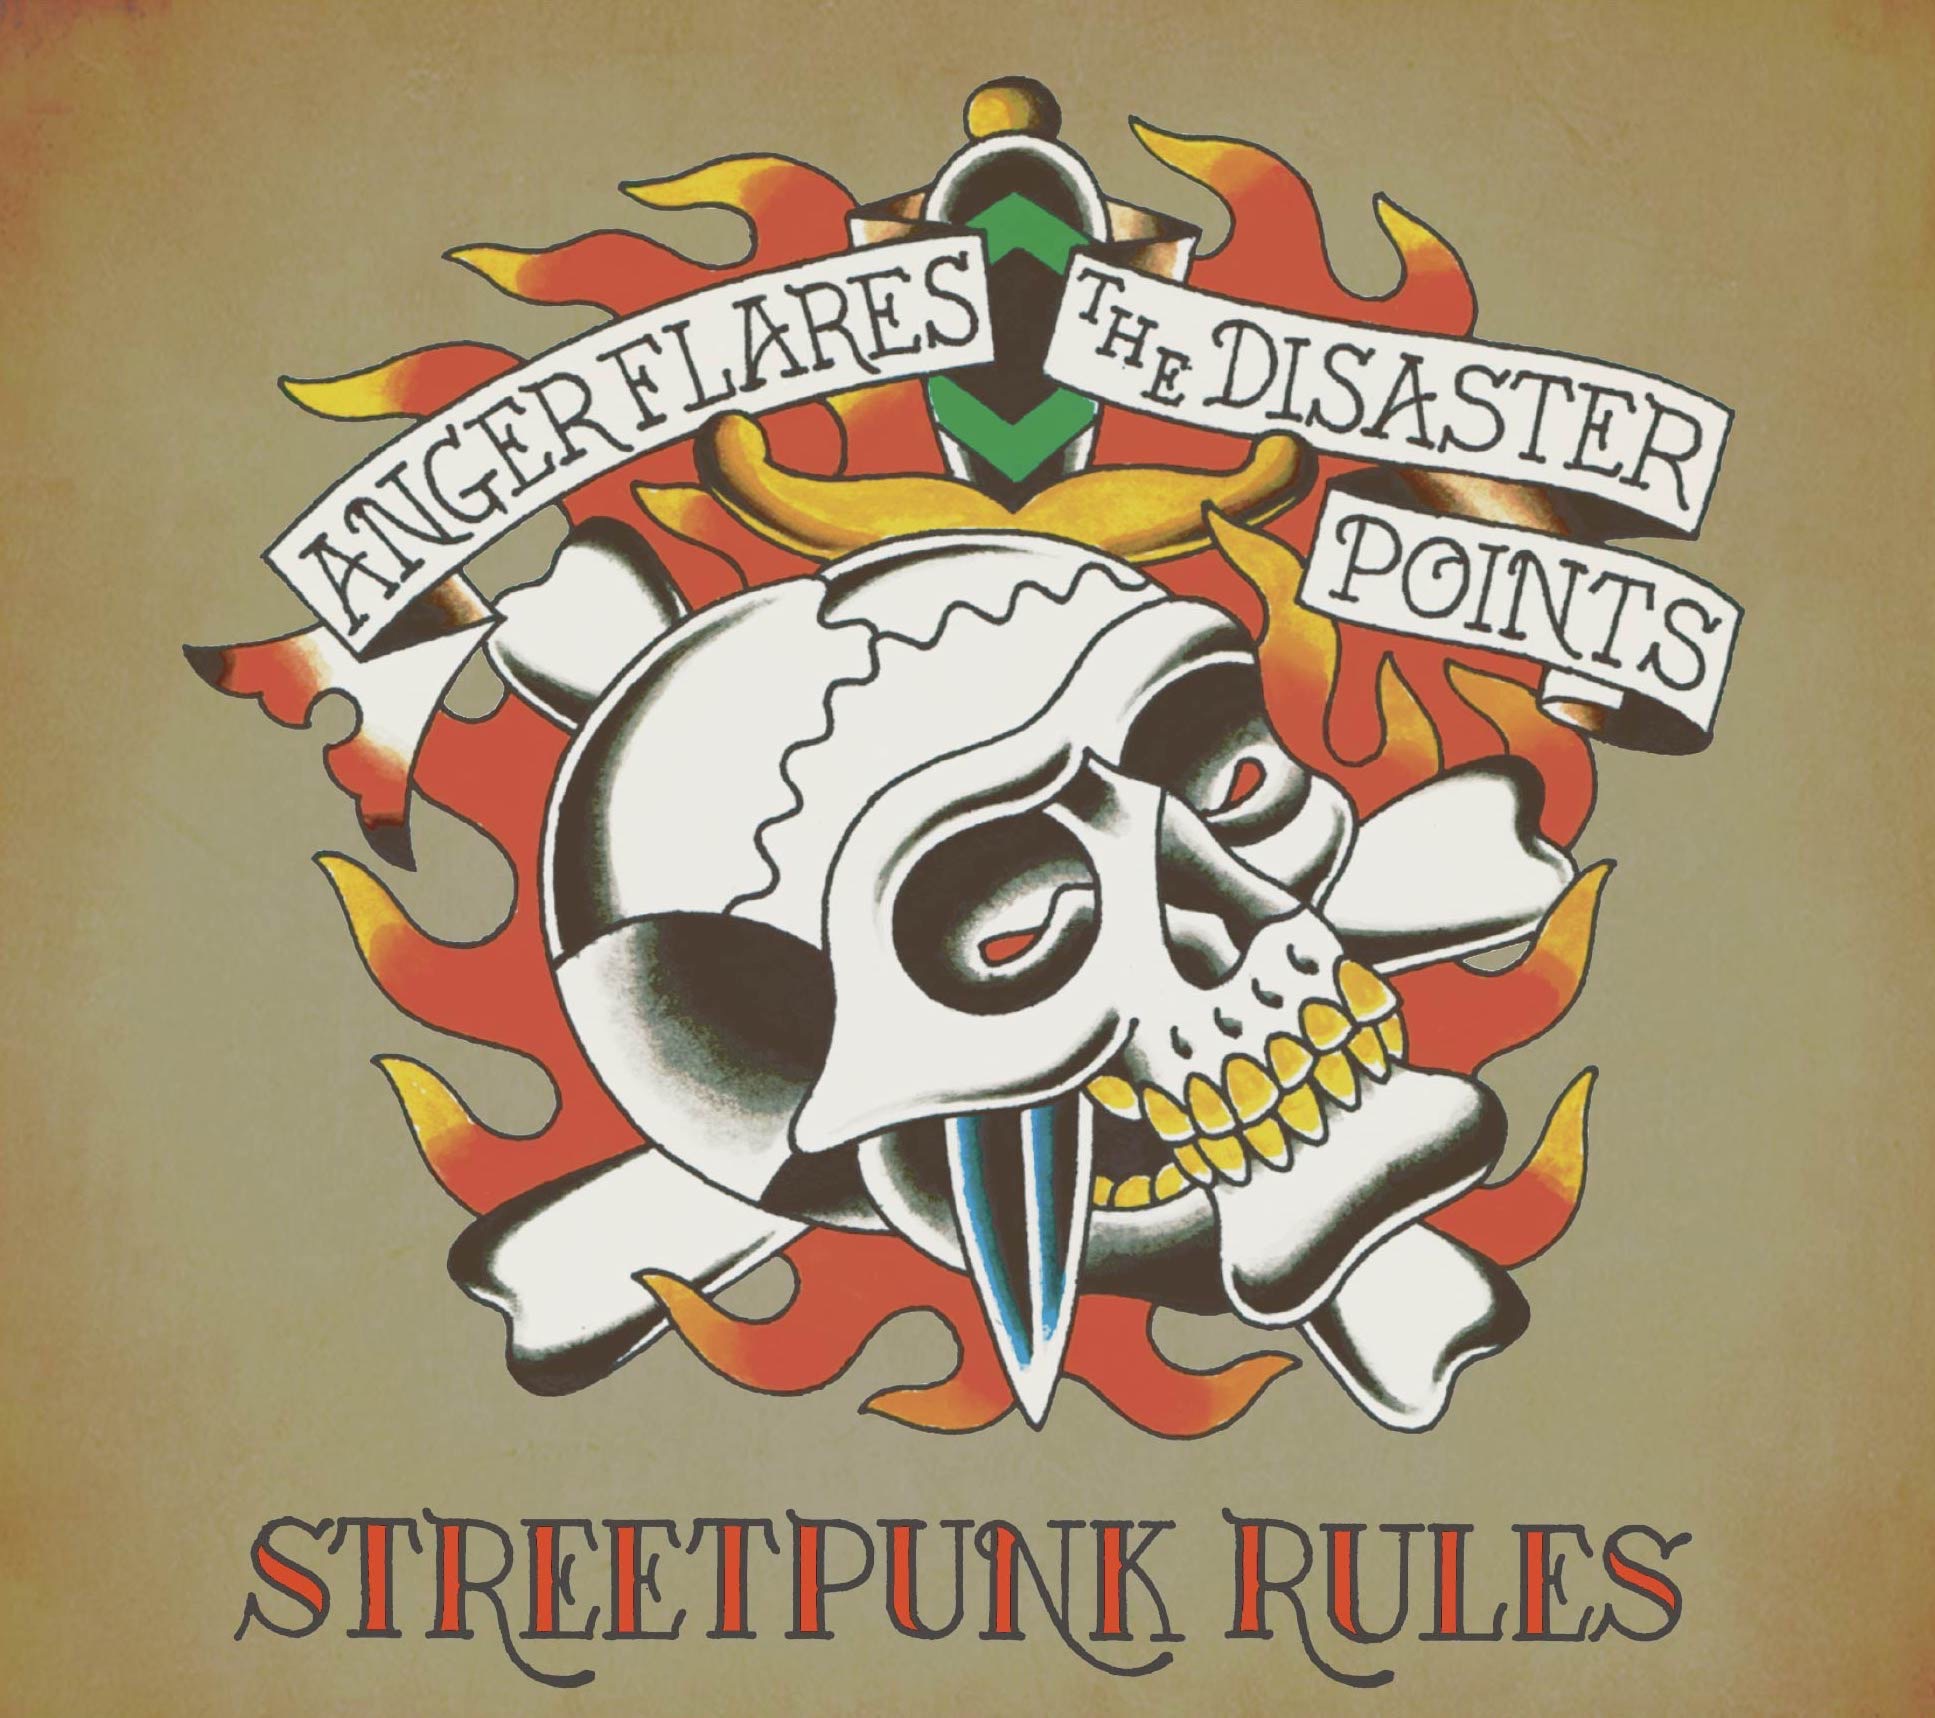 THE DISASTER POINTS & ANGER FLARES / STREETPUNK RULES